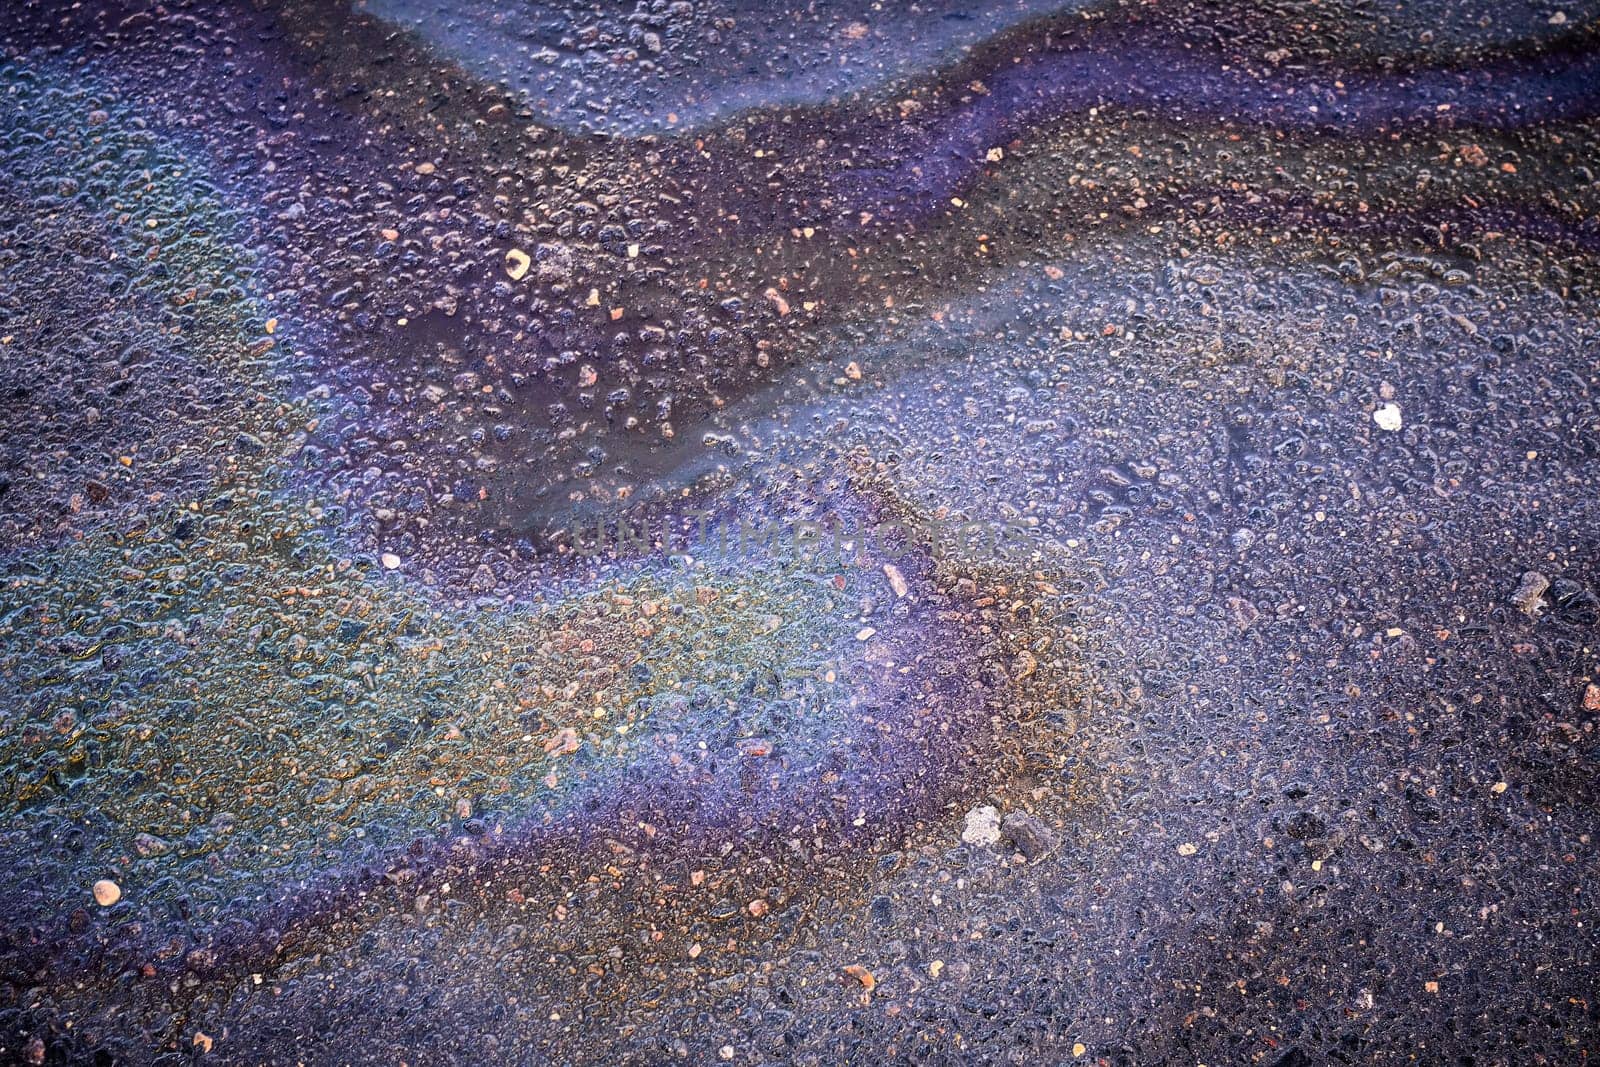 Textured stain of fuel or oil on wet asphalt on a rainy day. The concept of environmental pollution by AliaksandrFilimonau